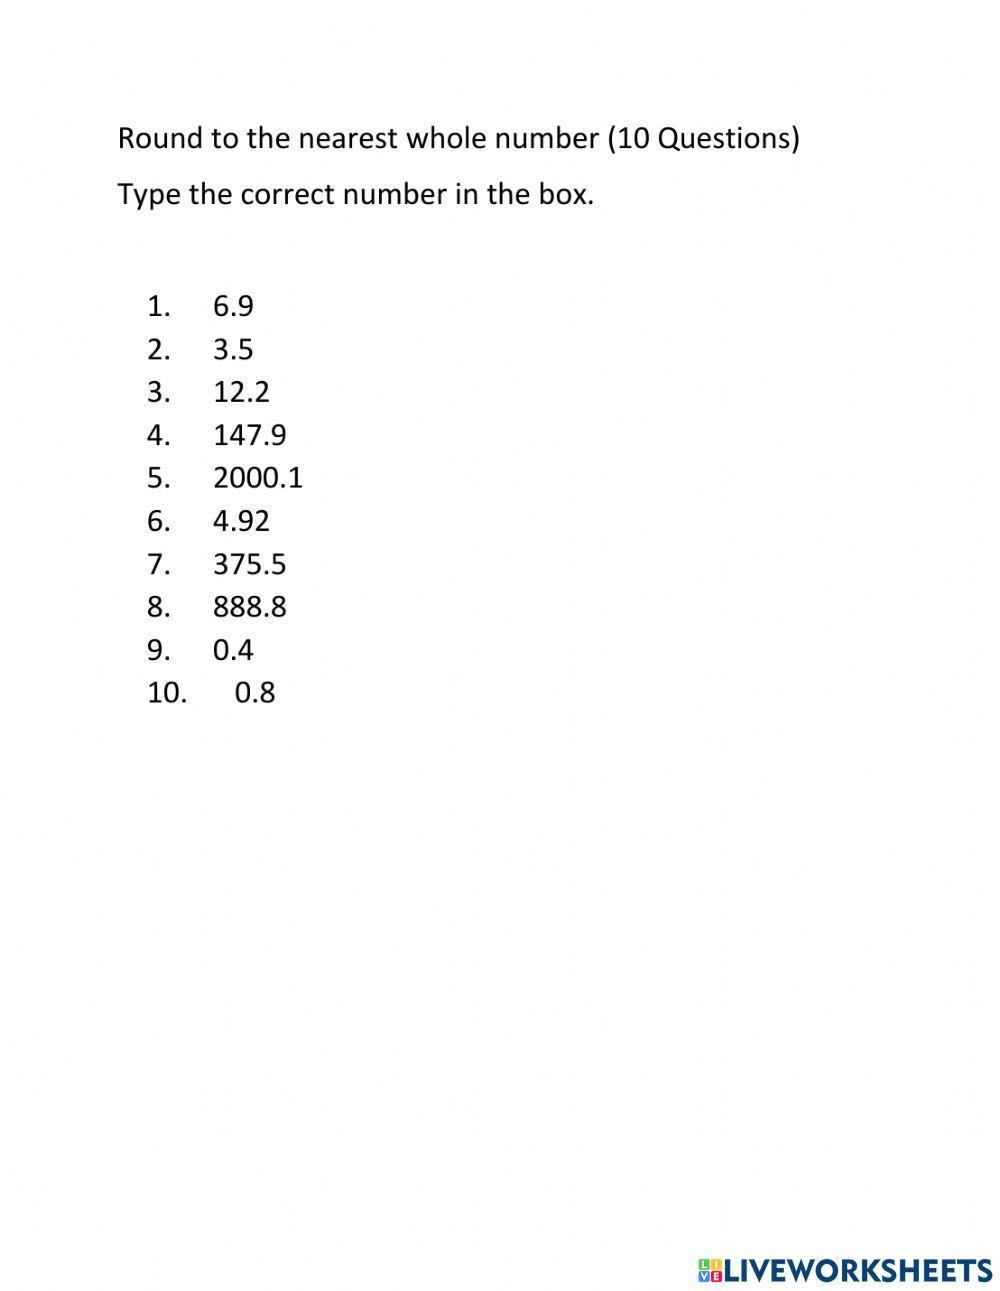 Round to nearest whole number